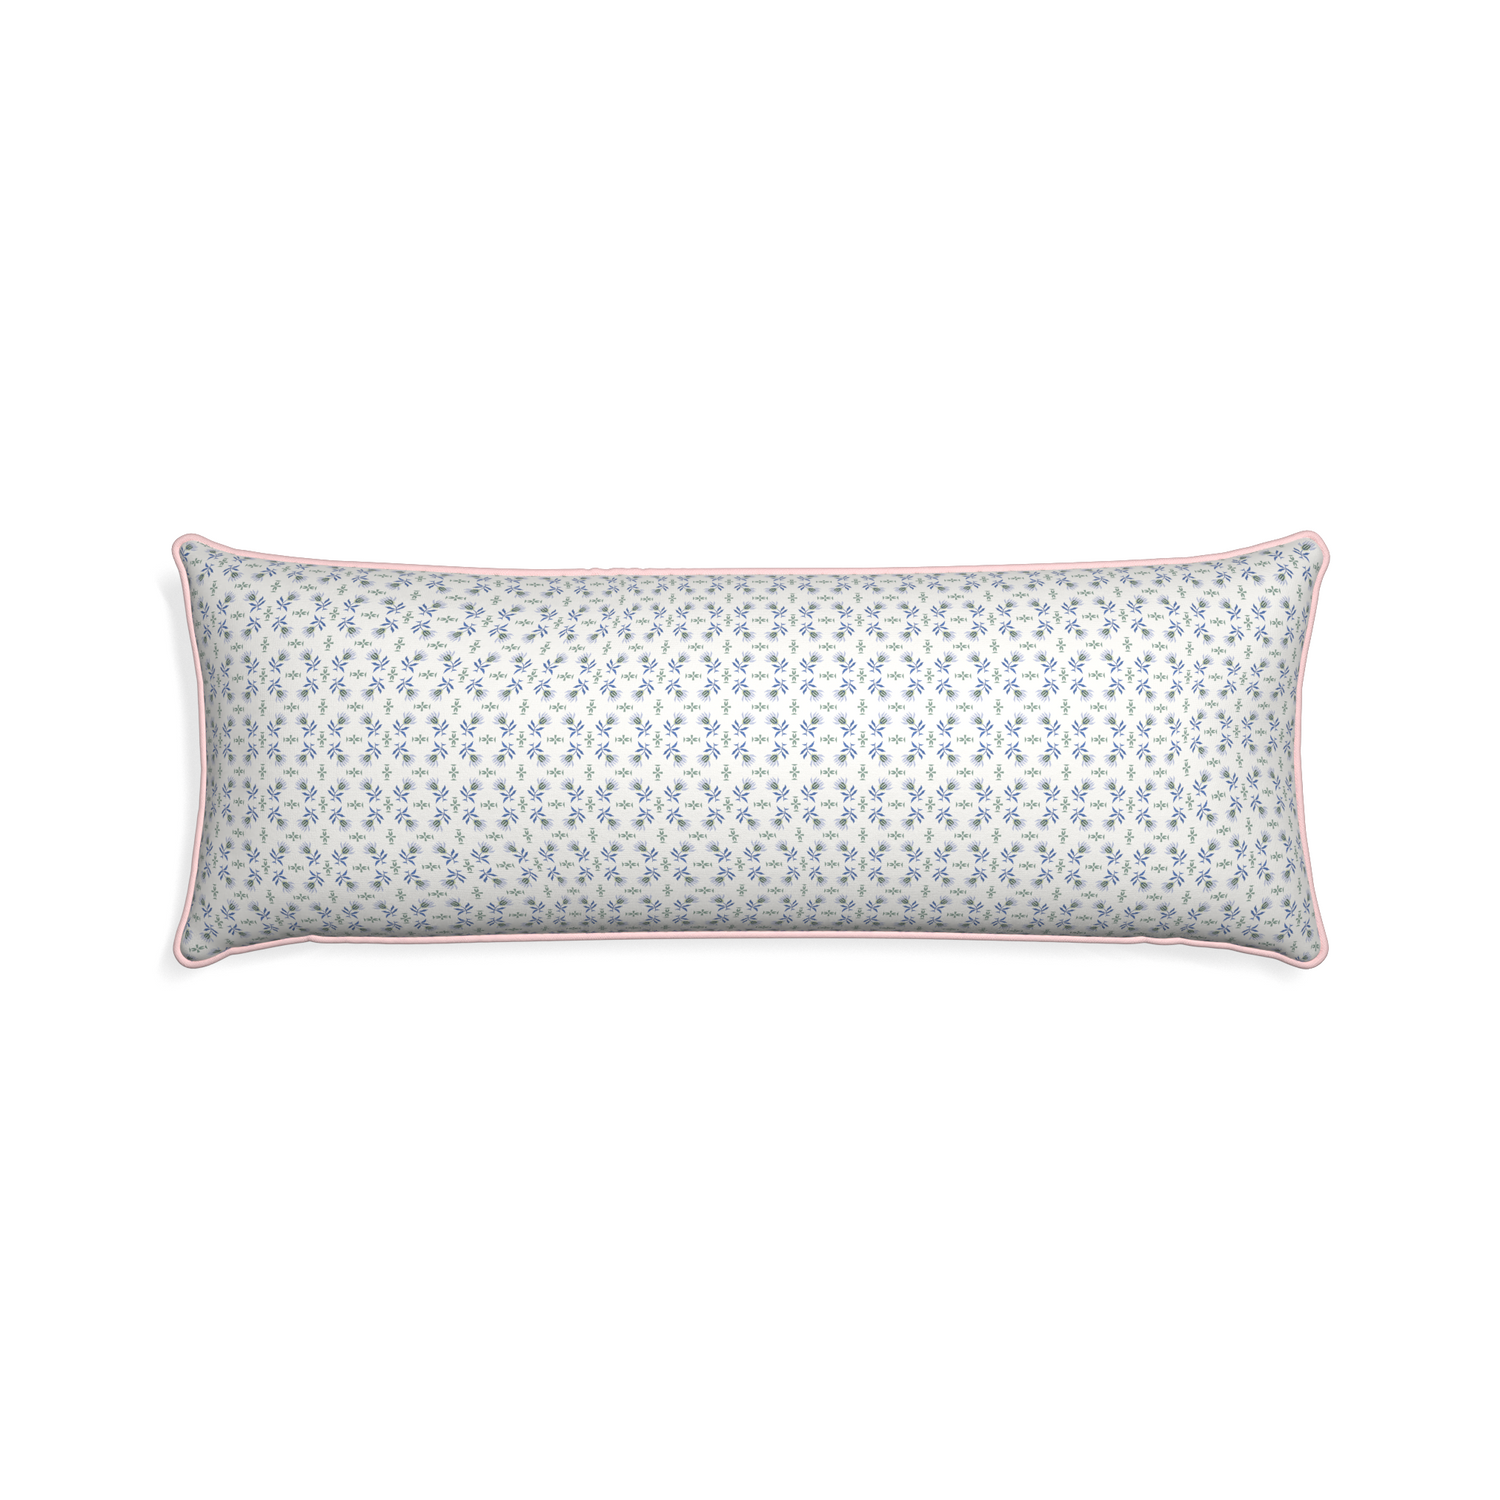 Xl-lumbar lee custom pillow with petal piping on white background